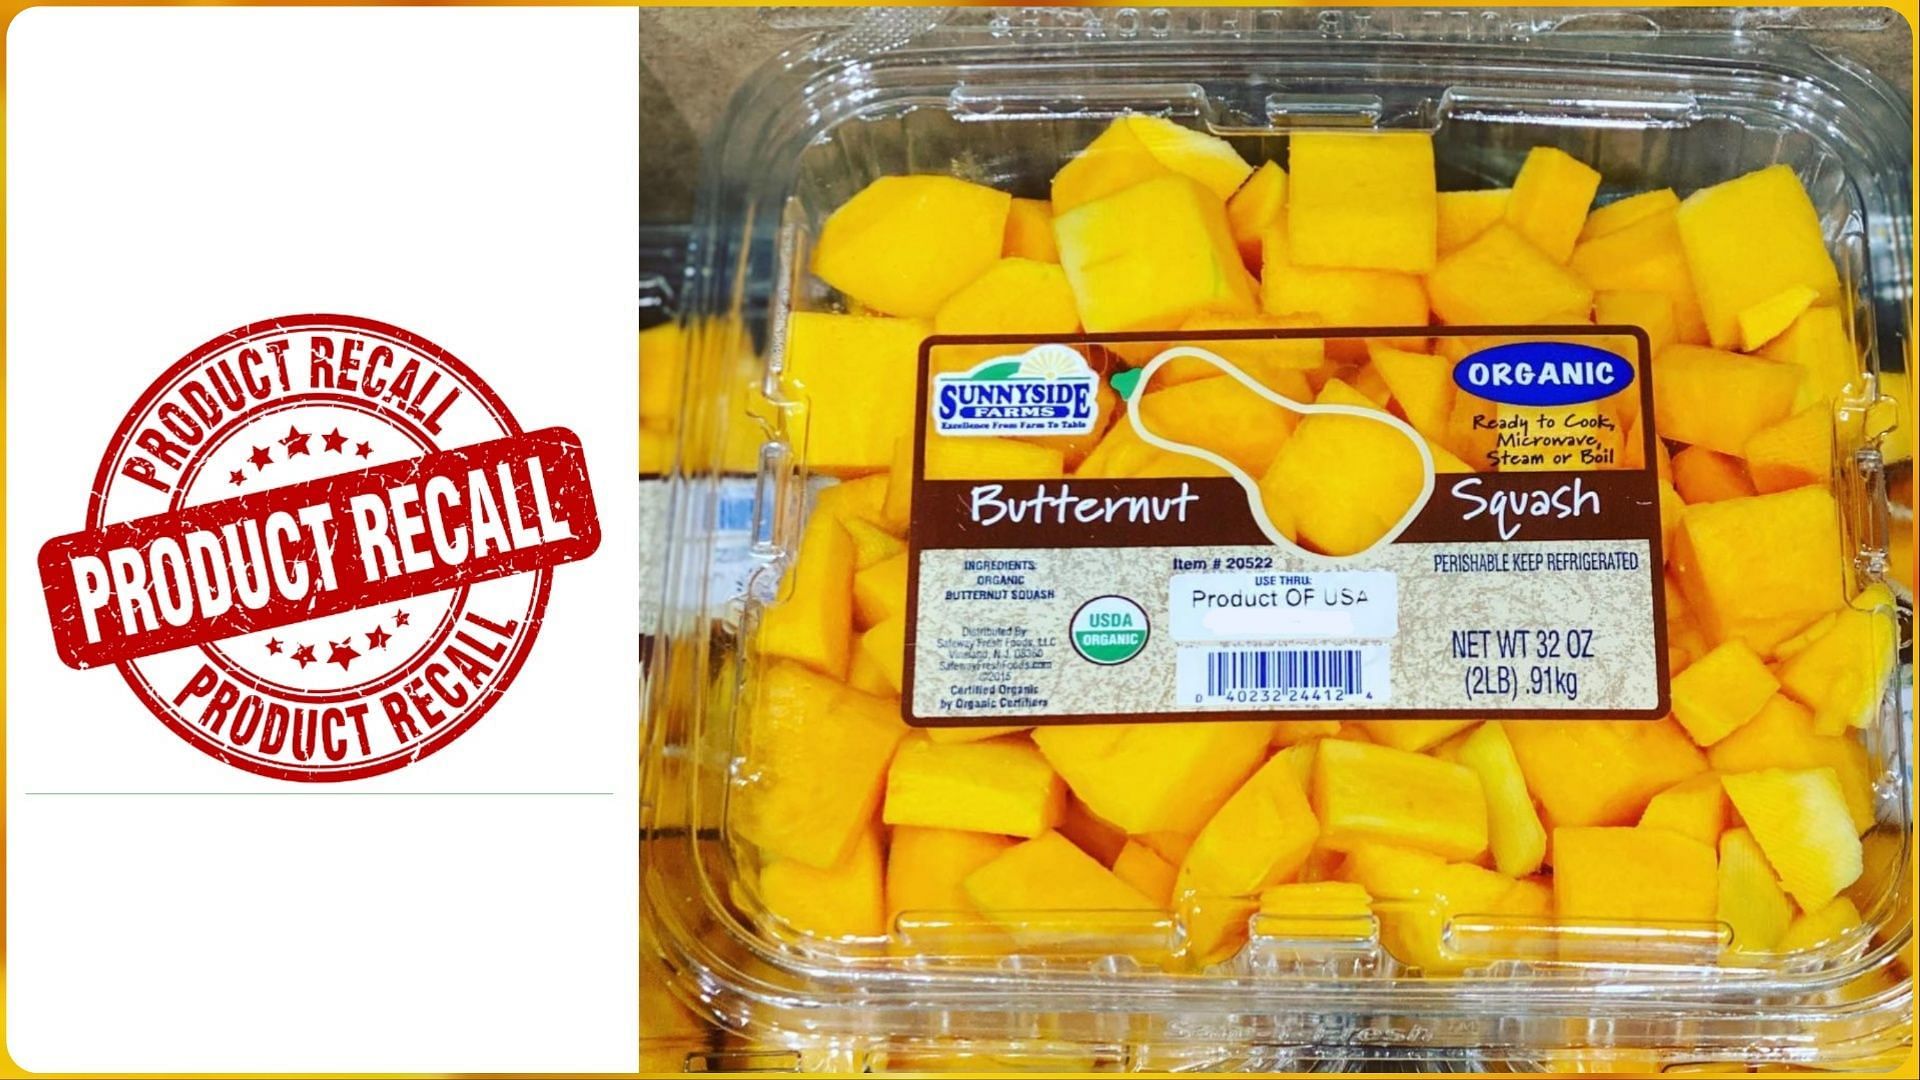 Safeway Fresh Foods Inc. recalls Costco Butternut Squash products over potential contamination with E. coli O45 (Image via @thecostcoconnoisseur on Instagram)